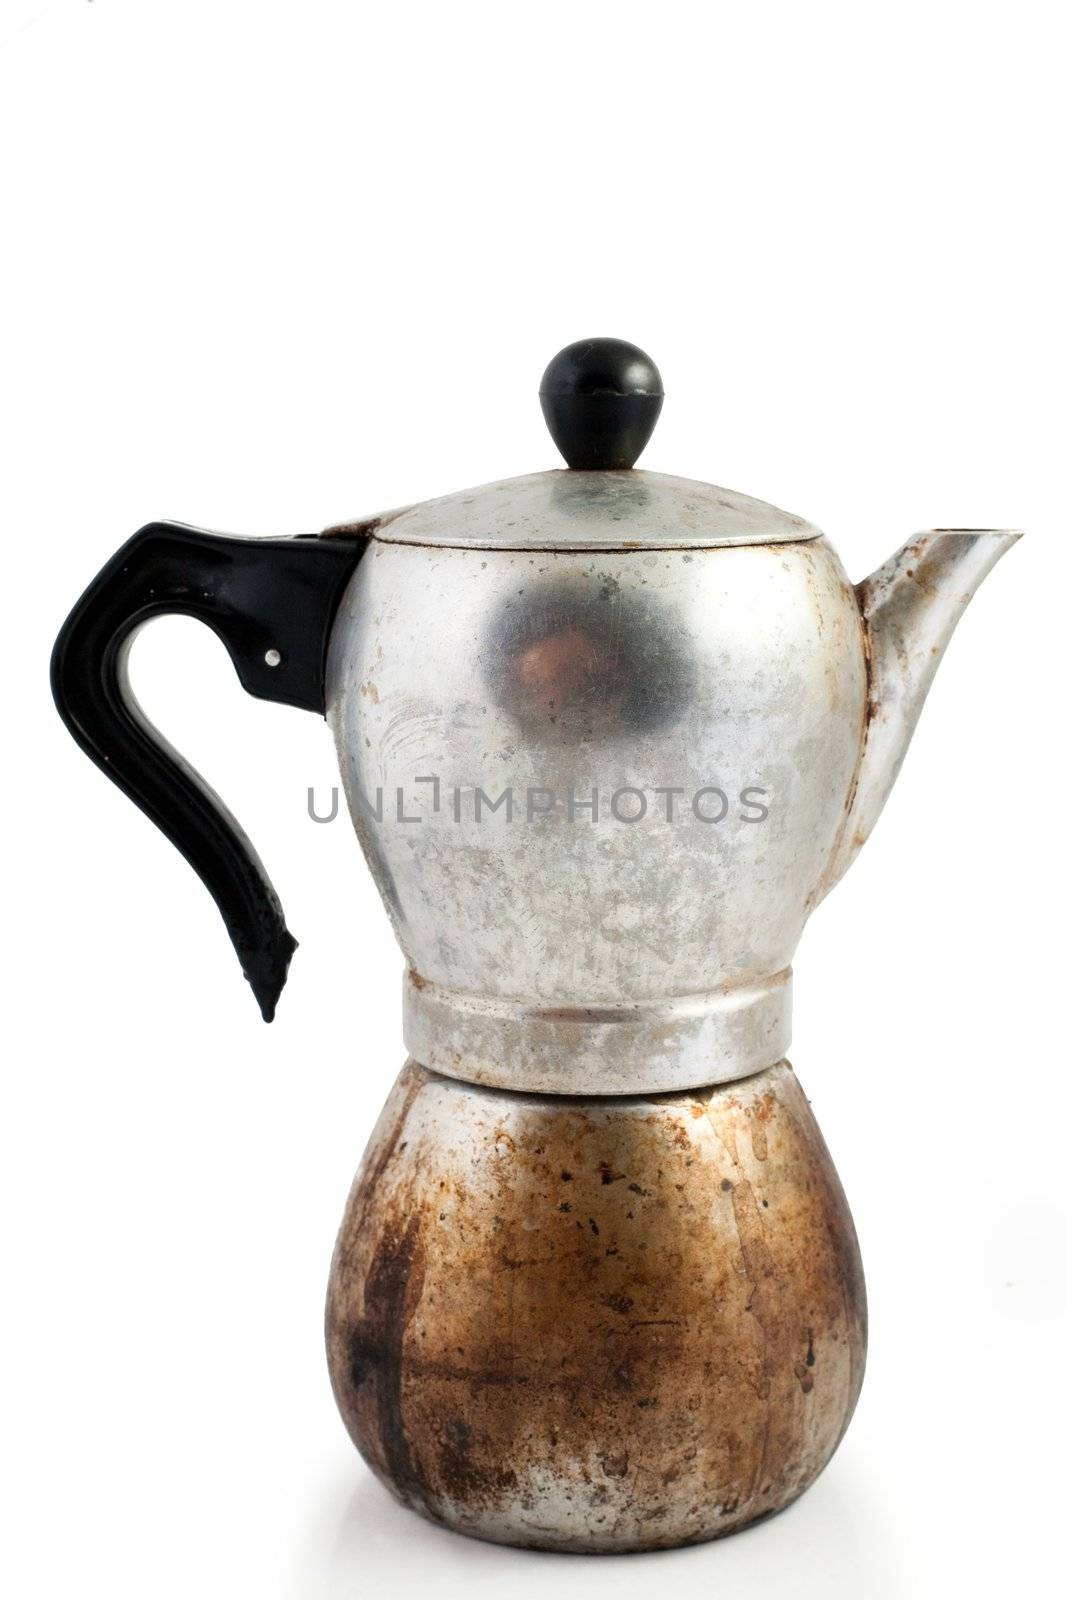 An image of a very old percolator